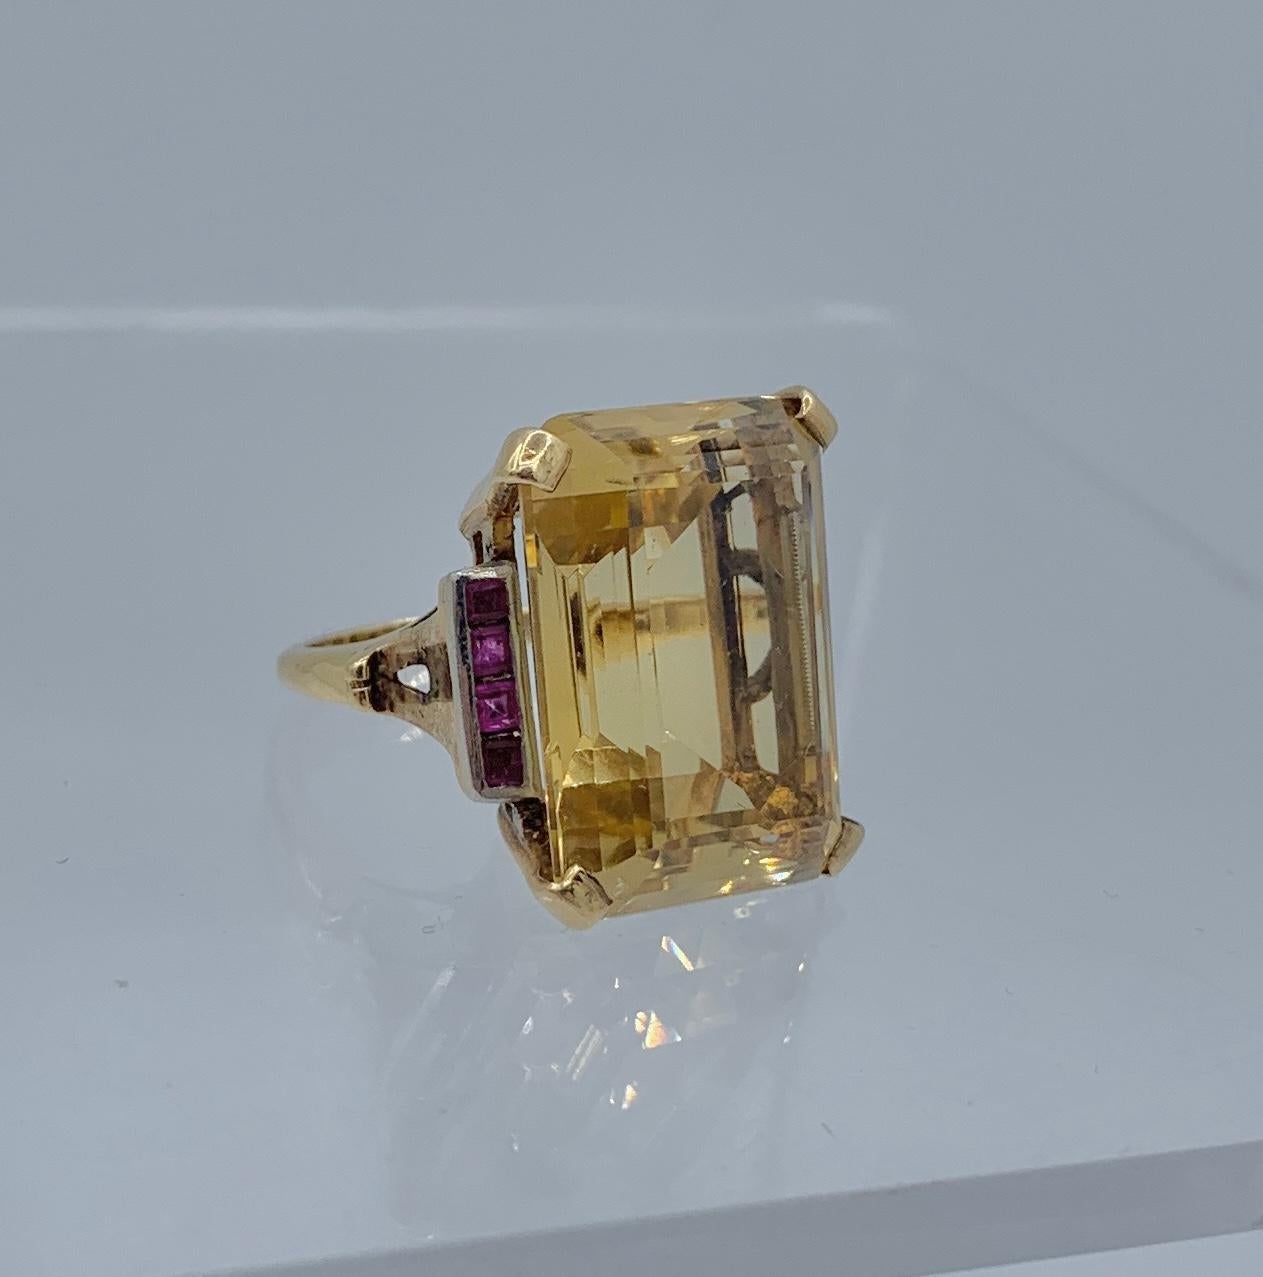 This is an absolutely magnificent antique monumental 28 Carat emerald cut Citrine Ring with Ruby and Diamond gems in a classic Art Deco - Hollywood Regency setting in 14 Karat Gold.  The ring is a testament to the stunning design of the Art Deco